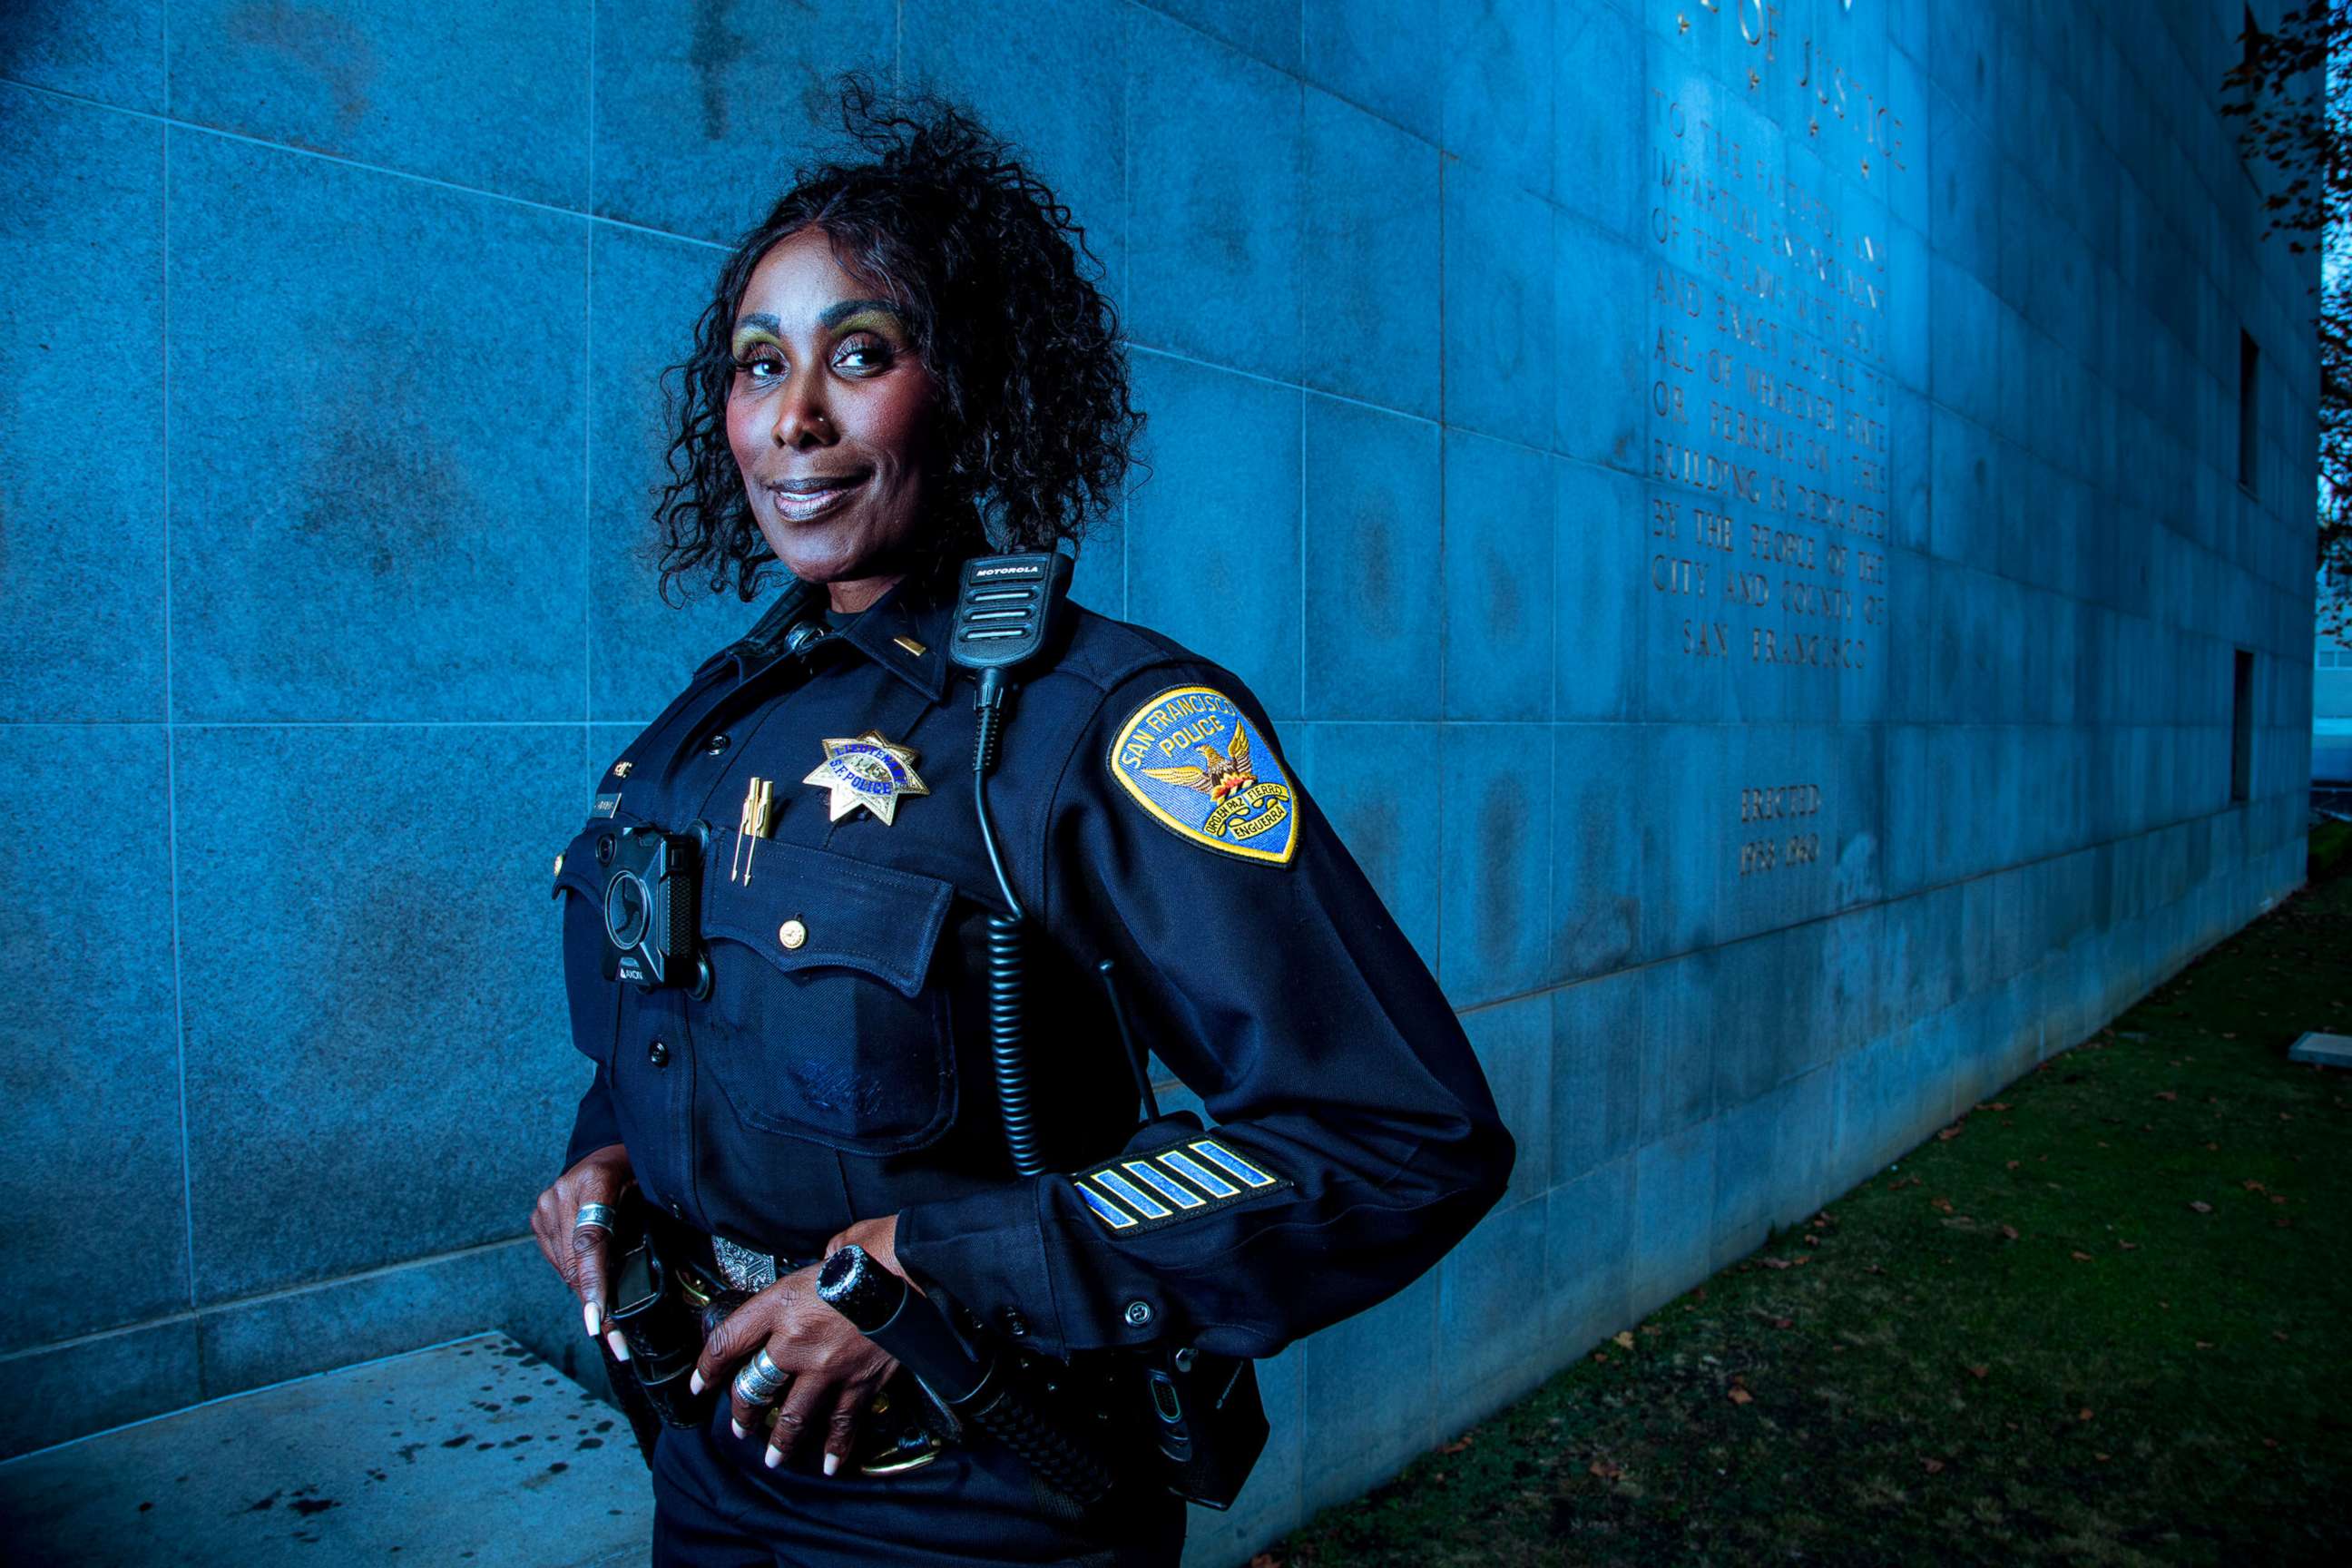 PHOTO: On January 20, 2016, Lt. Yulanda Williams testified in front of a Blue Ribbon Panel, attesting to systemic problems within the San Francisco Police Department-disparity in officer discipline, a lack of diversity in the upper ranks. 